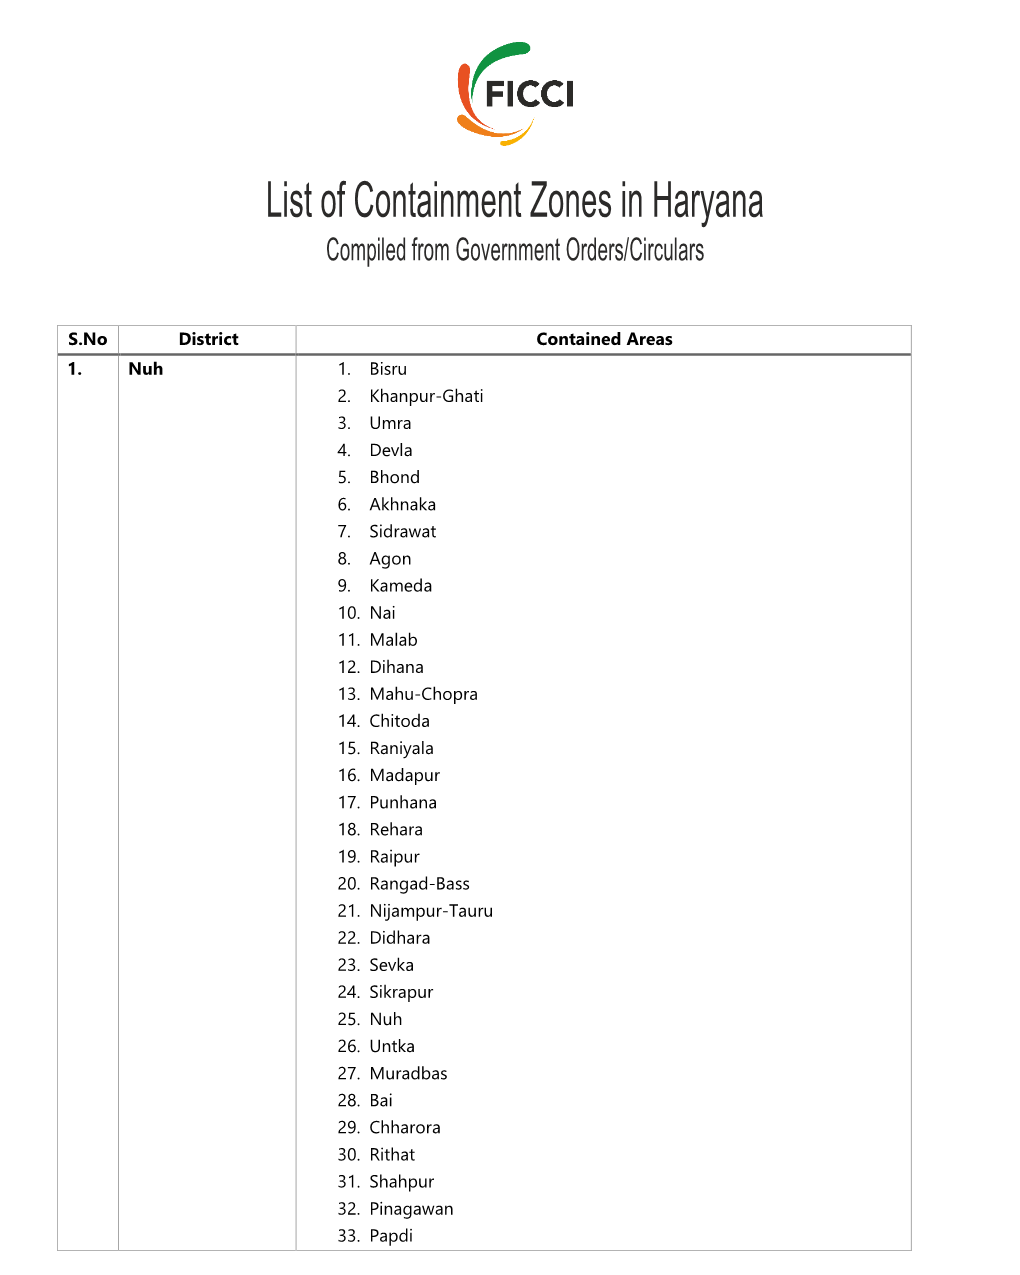 List of Containment Zones in Haryana